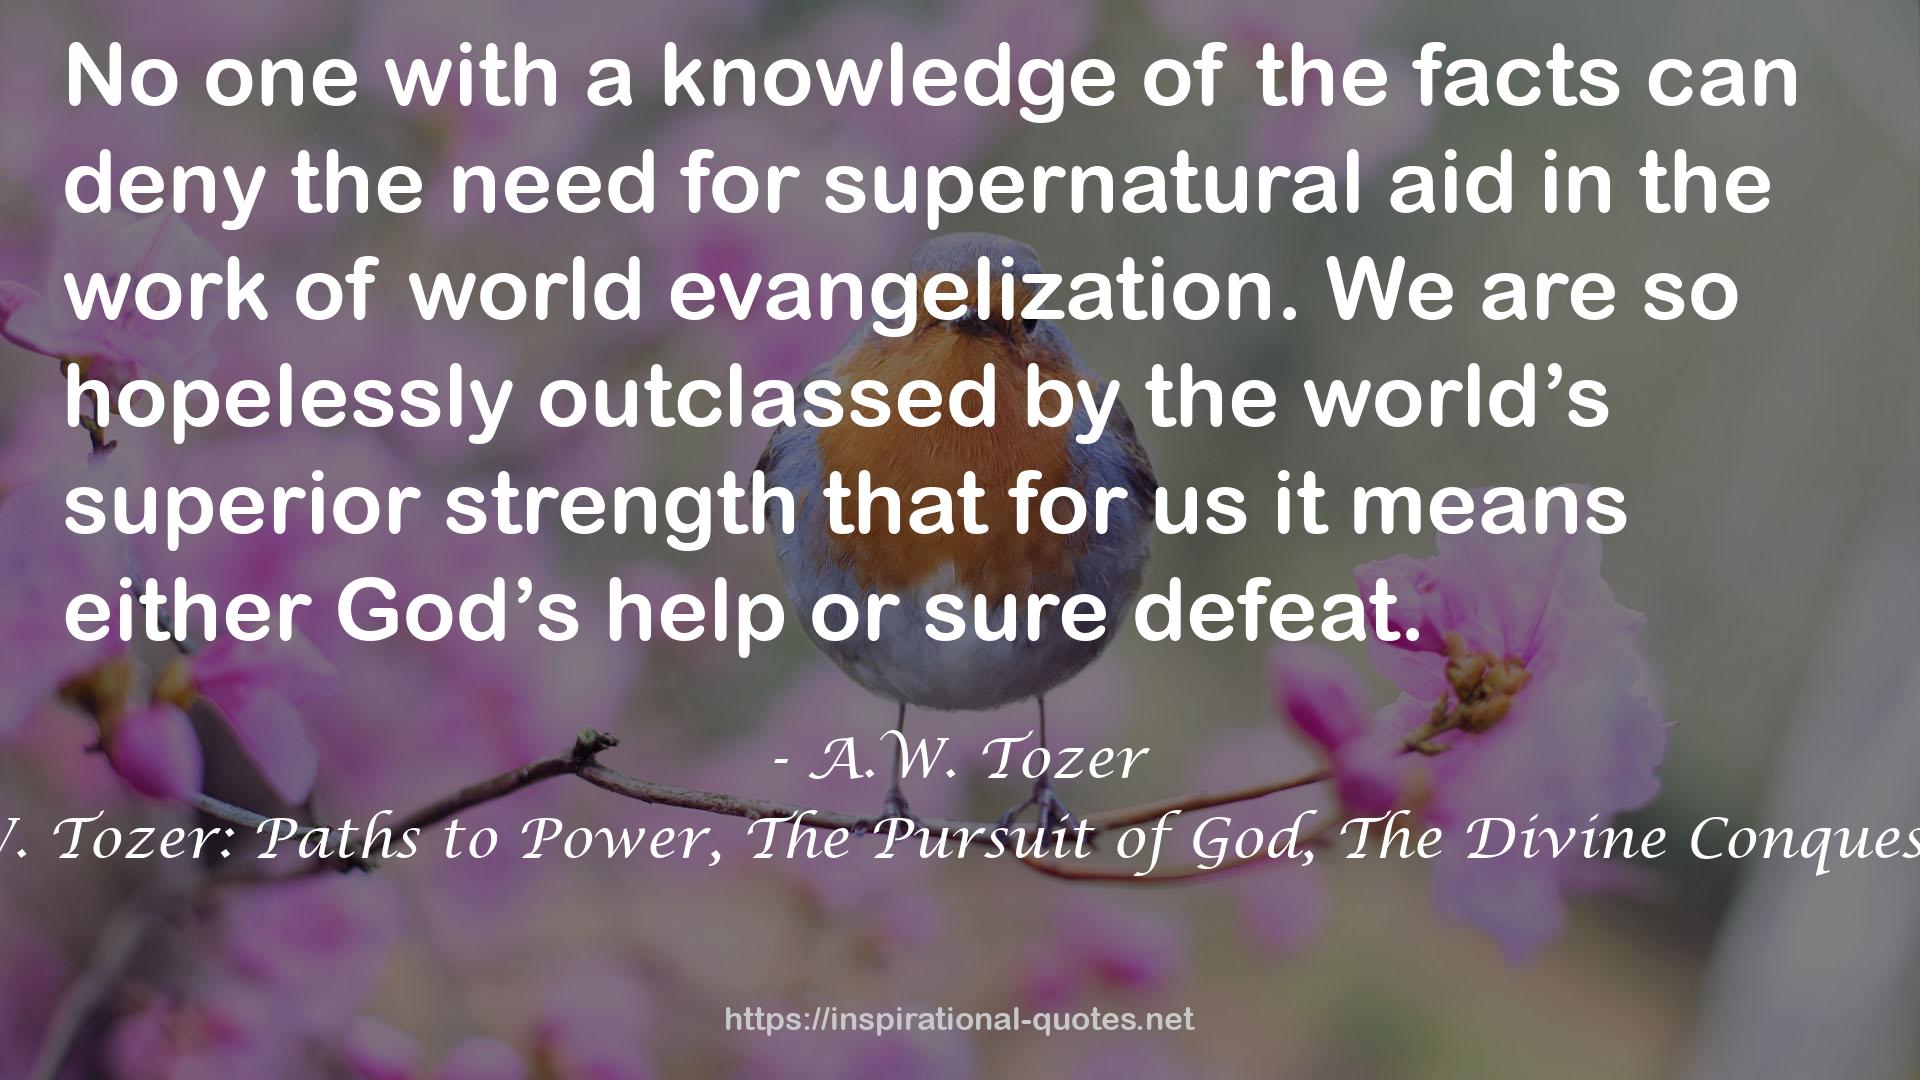 The Essential Works of A. W. Tozer: Paths to Power, The Pursuit of God, The Divine Conquest, The Root of the Righteous QUOTES